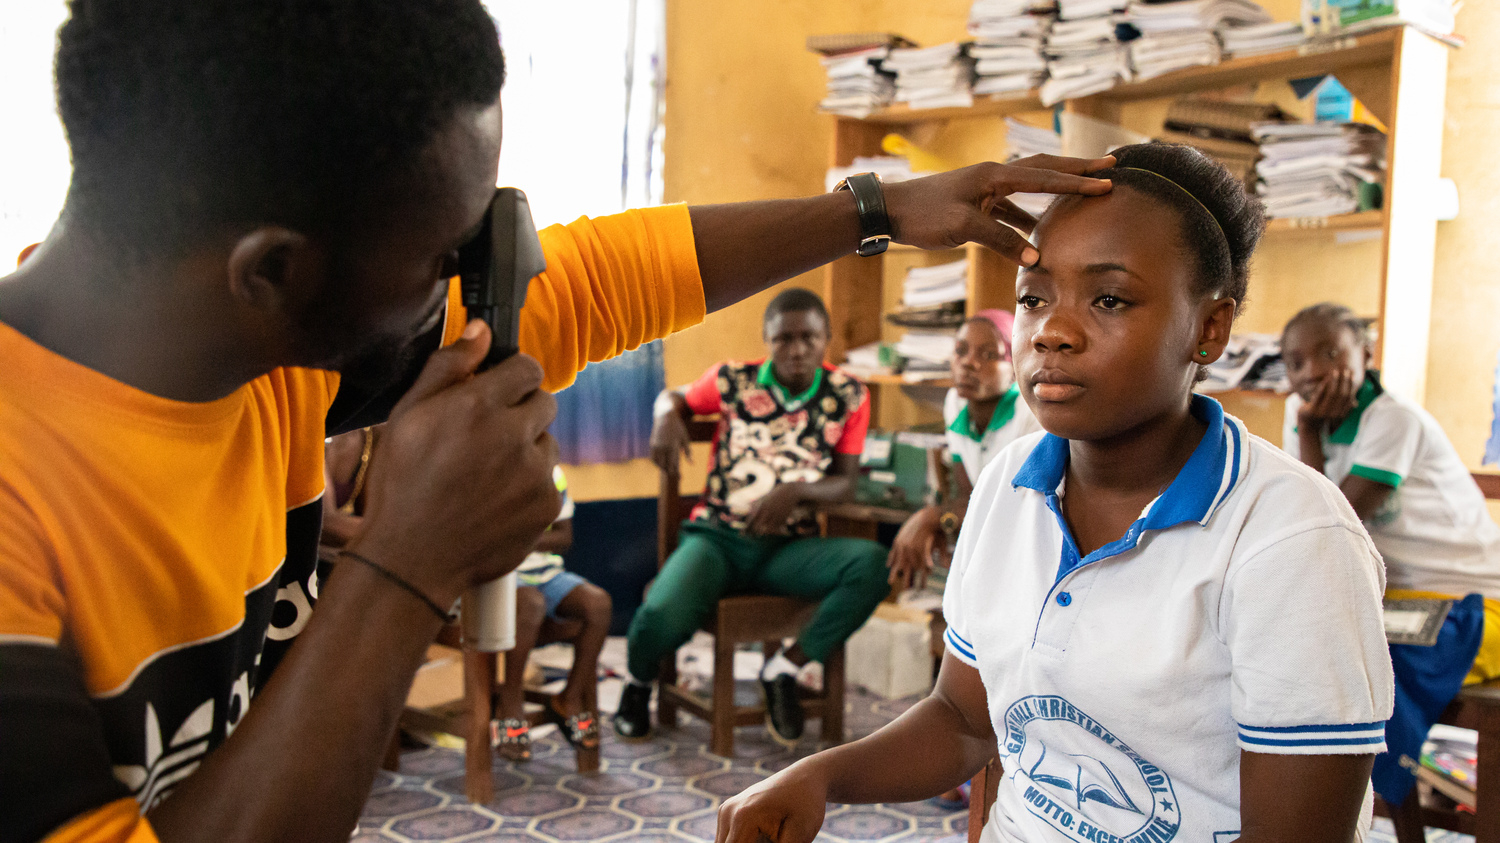 A girl sits on a chair, while a male health worker examines her eyes. The health worker is using a piece of medical equipment with an eye piece and a black handle.